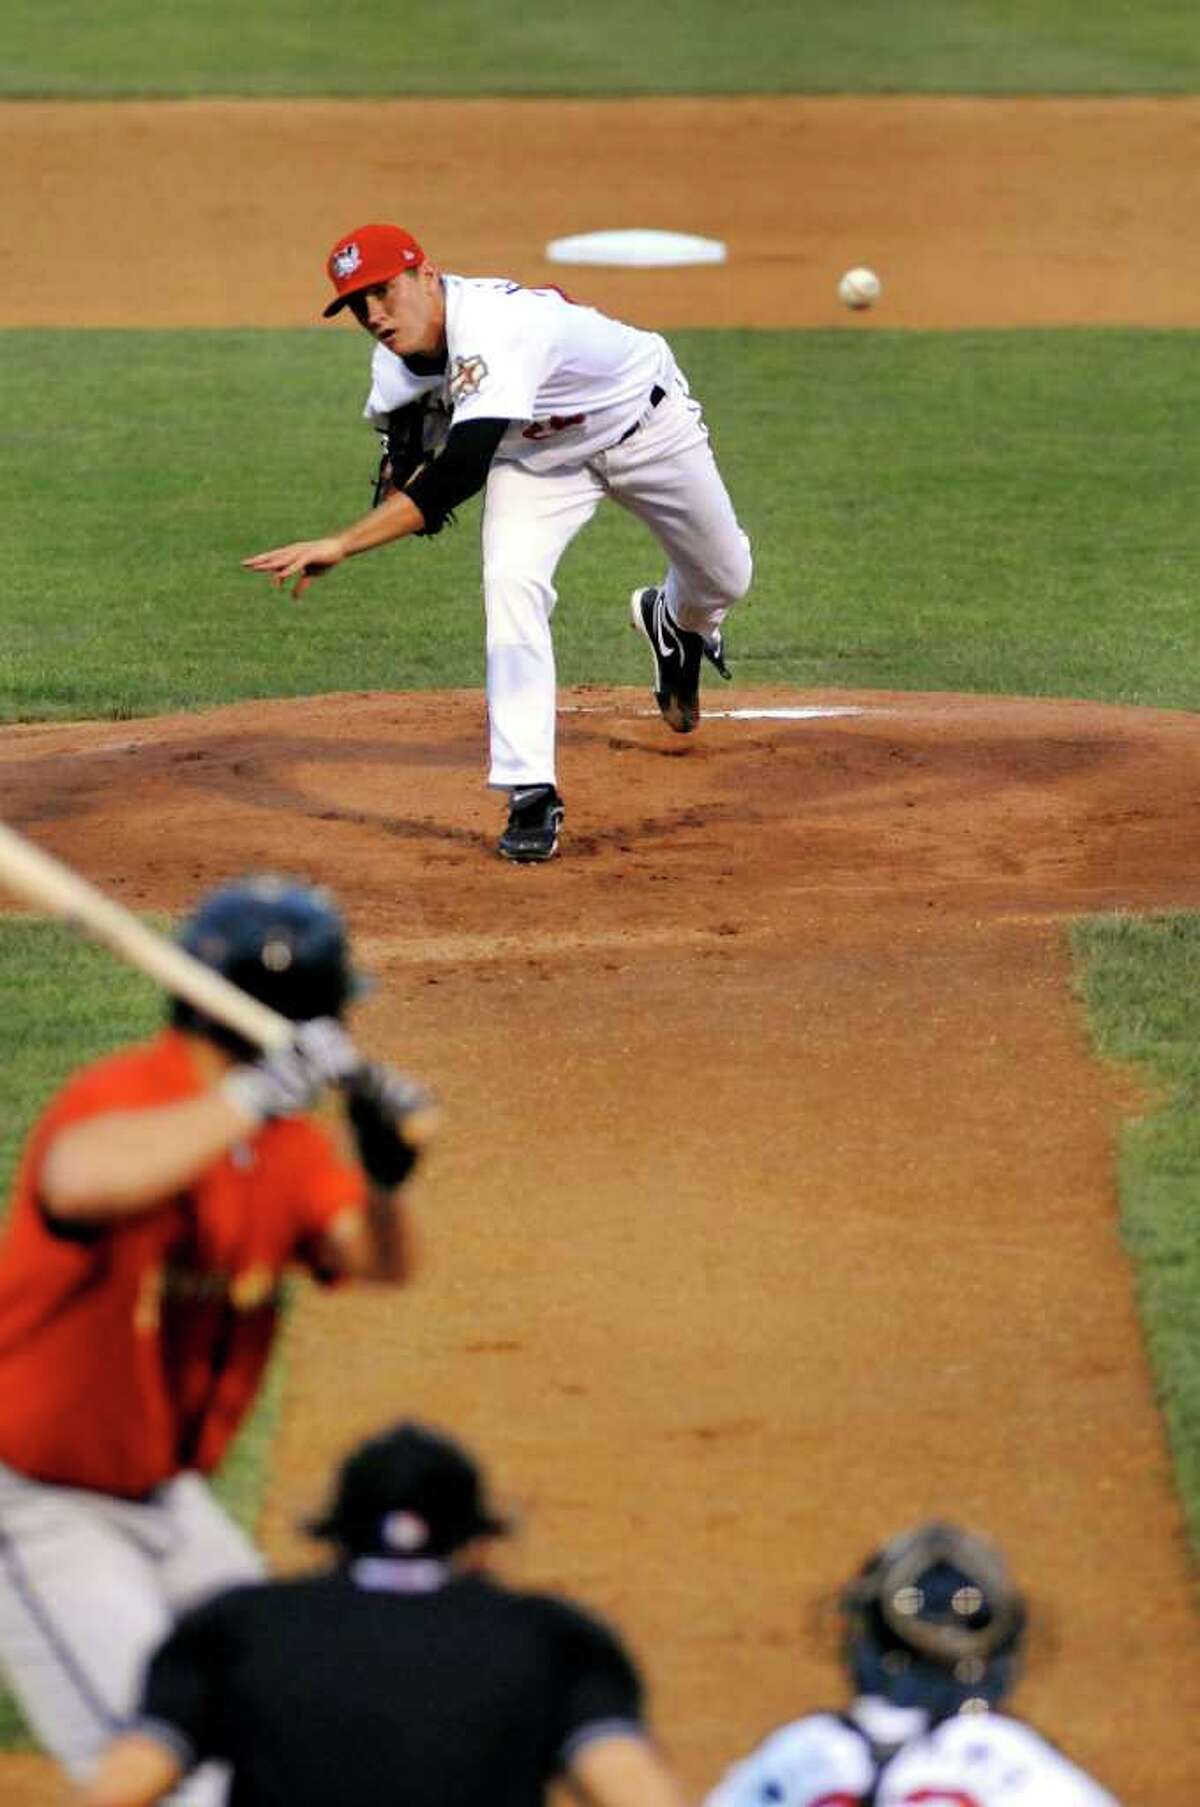 ValleyCats pitcher Kyle Hallock (24) releases a pitch during their baseball game against State College on Friday, July 29, 2011, in Troy, N.Y. (Cindy Schultz / Times Union)